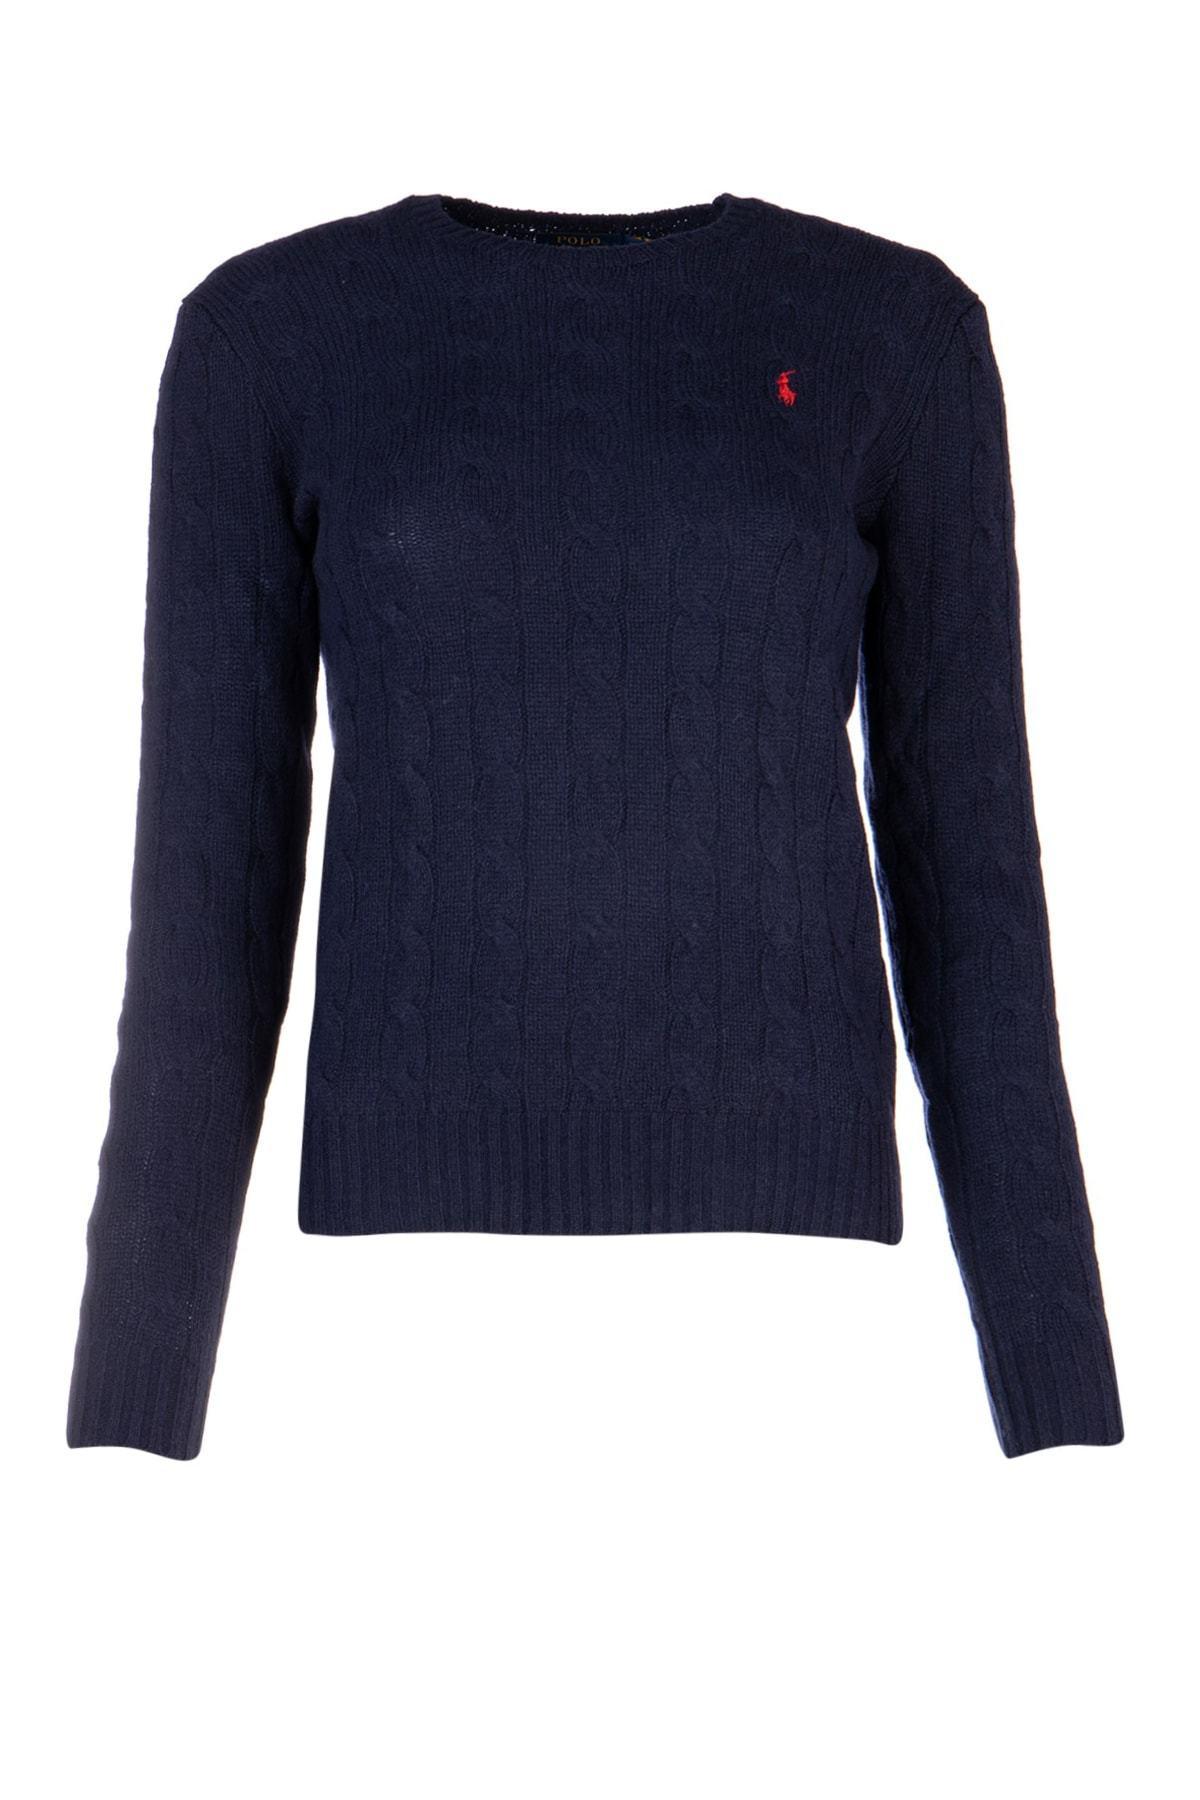 Polo Ralph Lauren Cotton Cable Knit Sweater in Navy (Blue) - Lyst